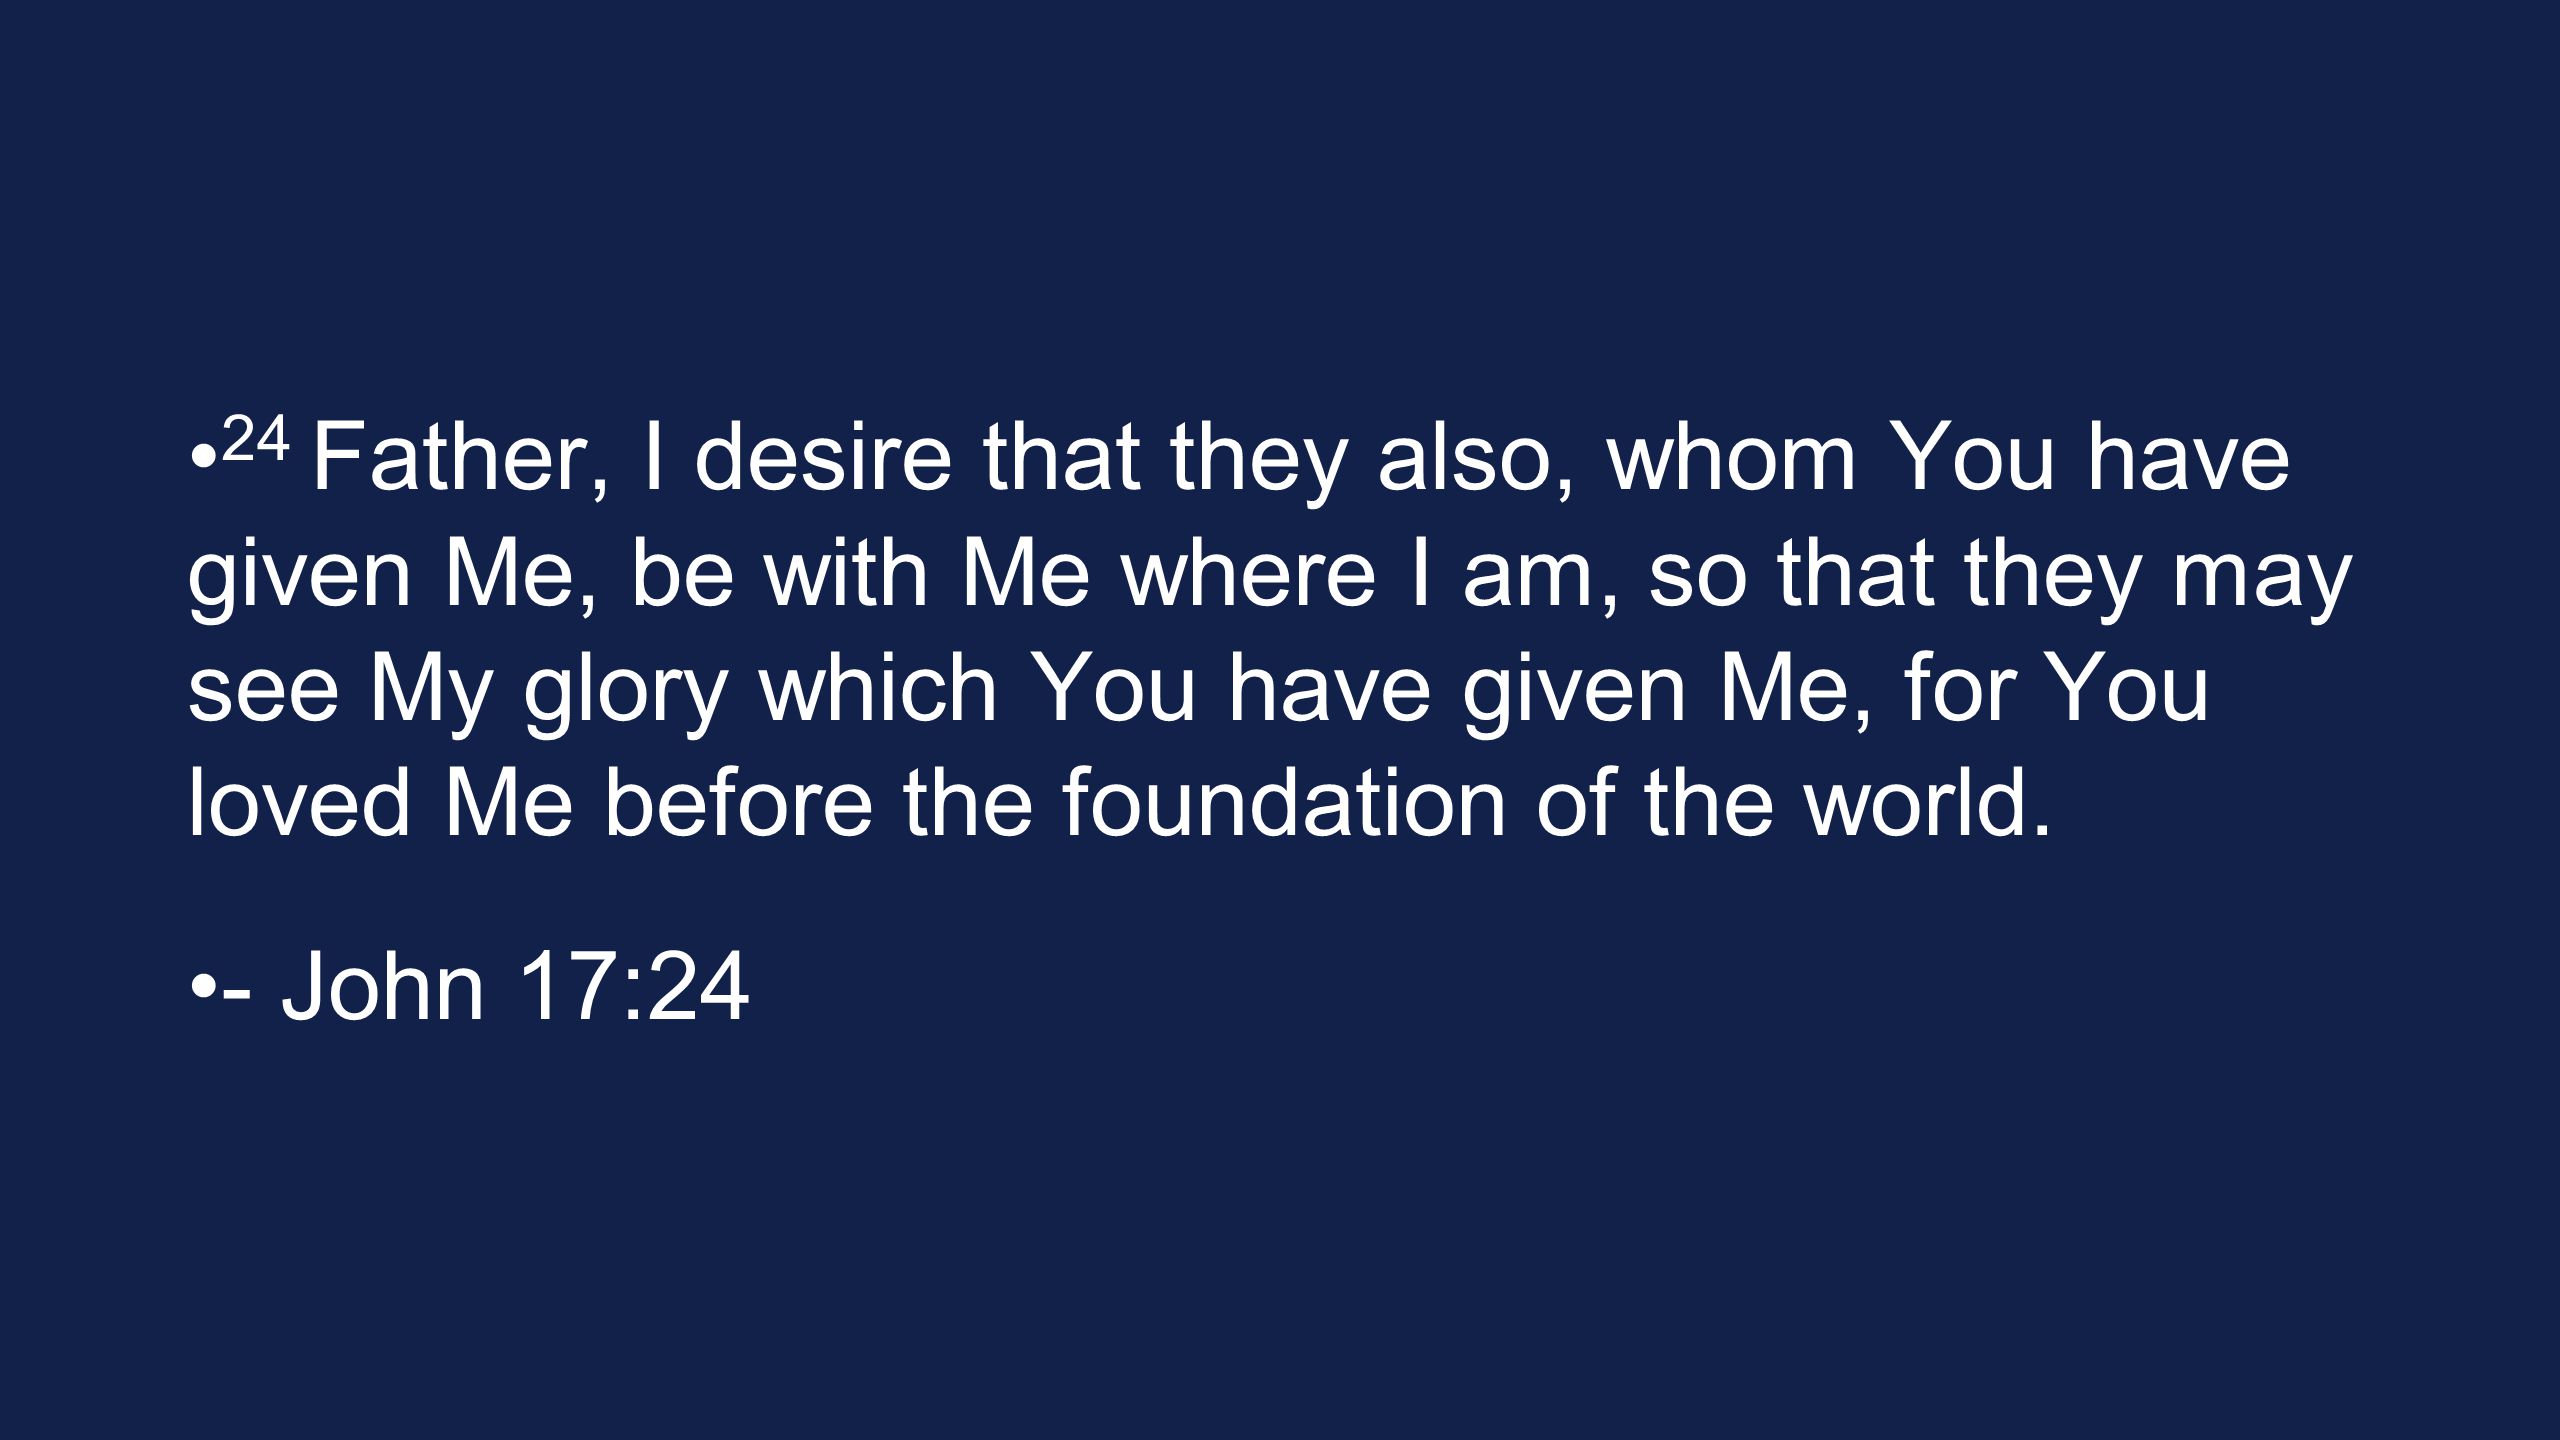 24 Father, I desire that they also, whom You have given Me, be with Me where I am, so that they may see My glory which You have given Me, for You loved Me before the foundation of the world.